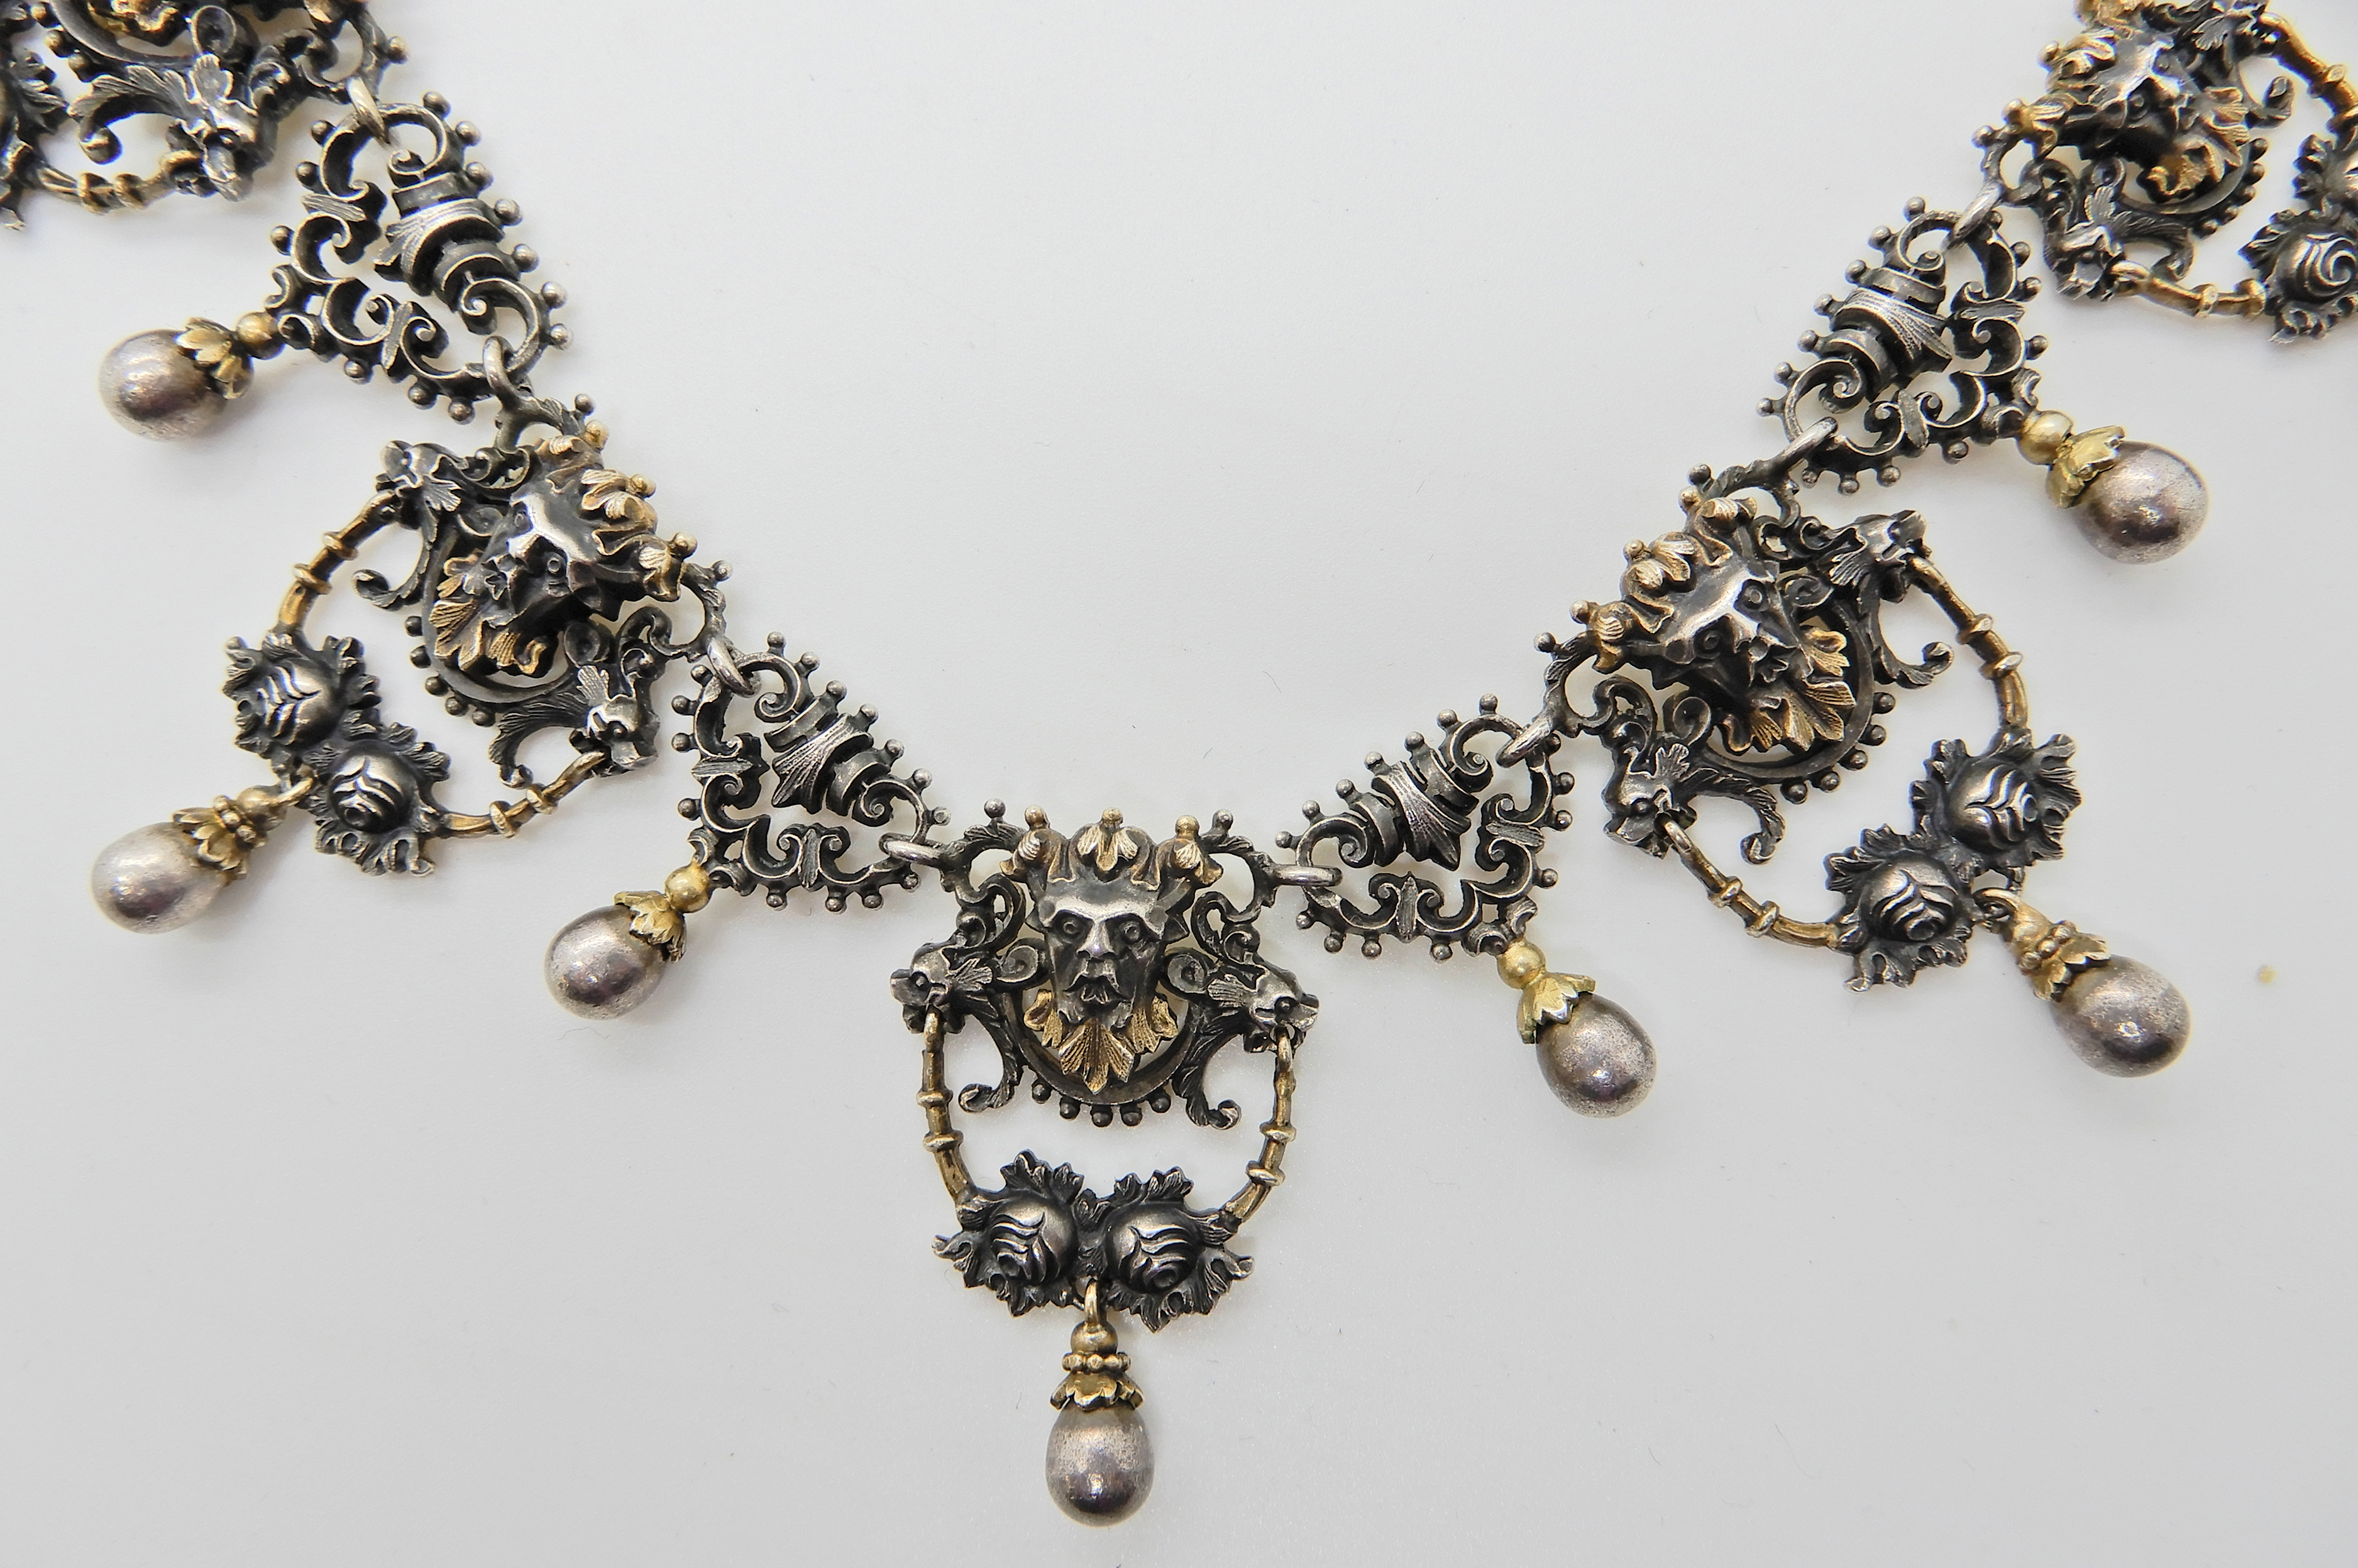 A gilded white metal Gothic design necklace with lion heads and 'Pan' grotesque masks and roses, - Image 3 of 8